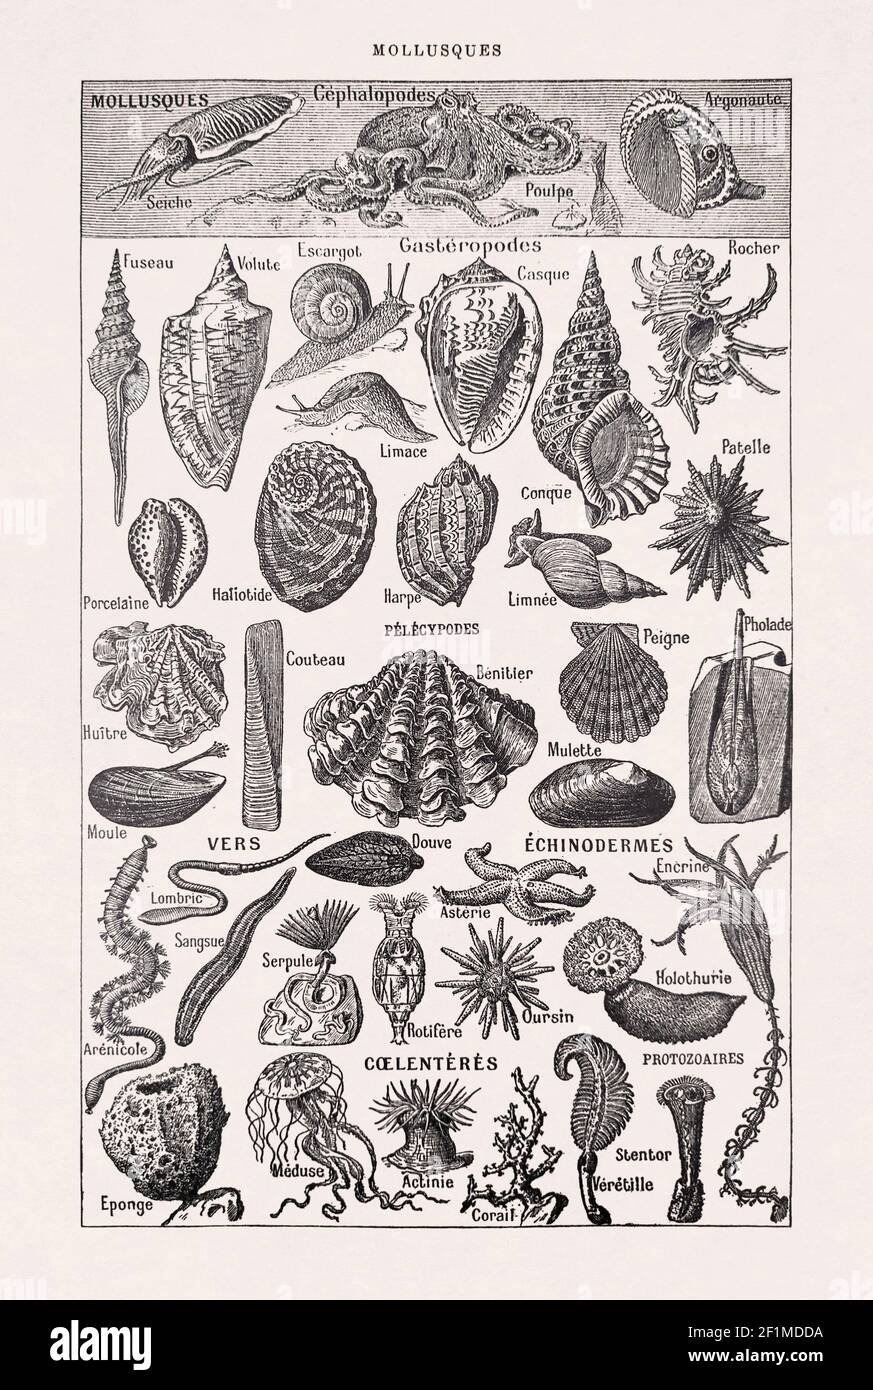 Old illustration about the marine life (Molluscs, worms, echinoderms, coelenterates and infusoria) by Millot & Demoulin in the french dictionary 'Dict Stock Photo